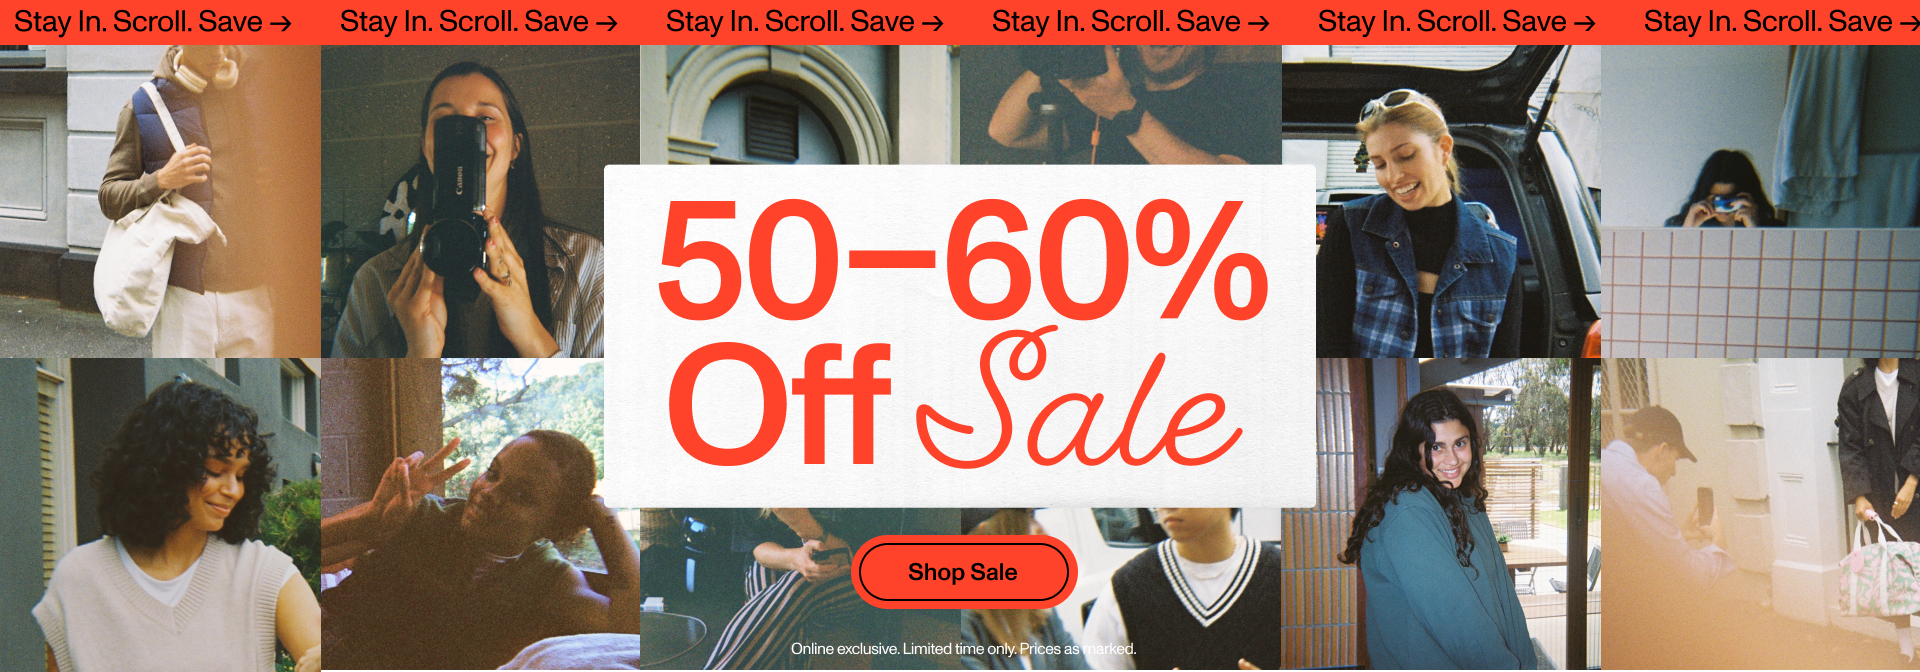 Stay In. Scroll. Save. 50-60% Off Sale. Shop Now.